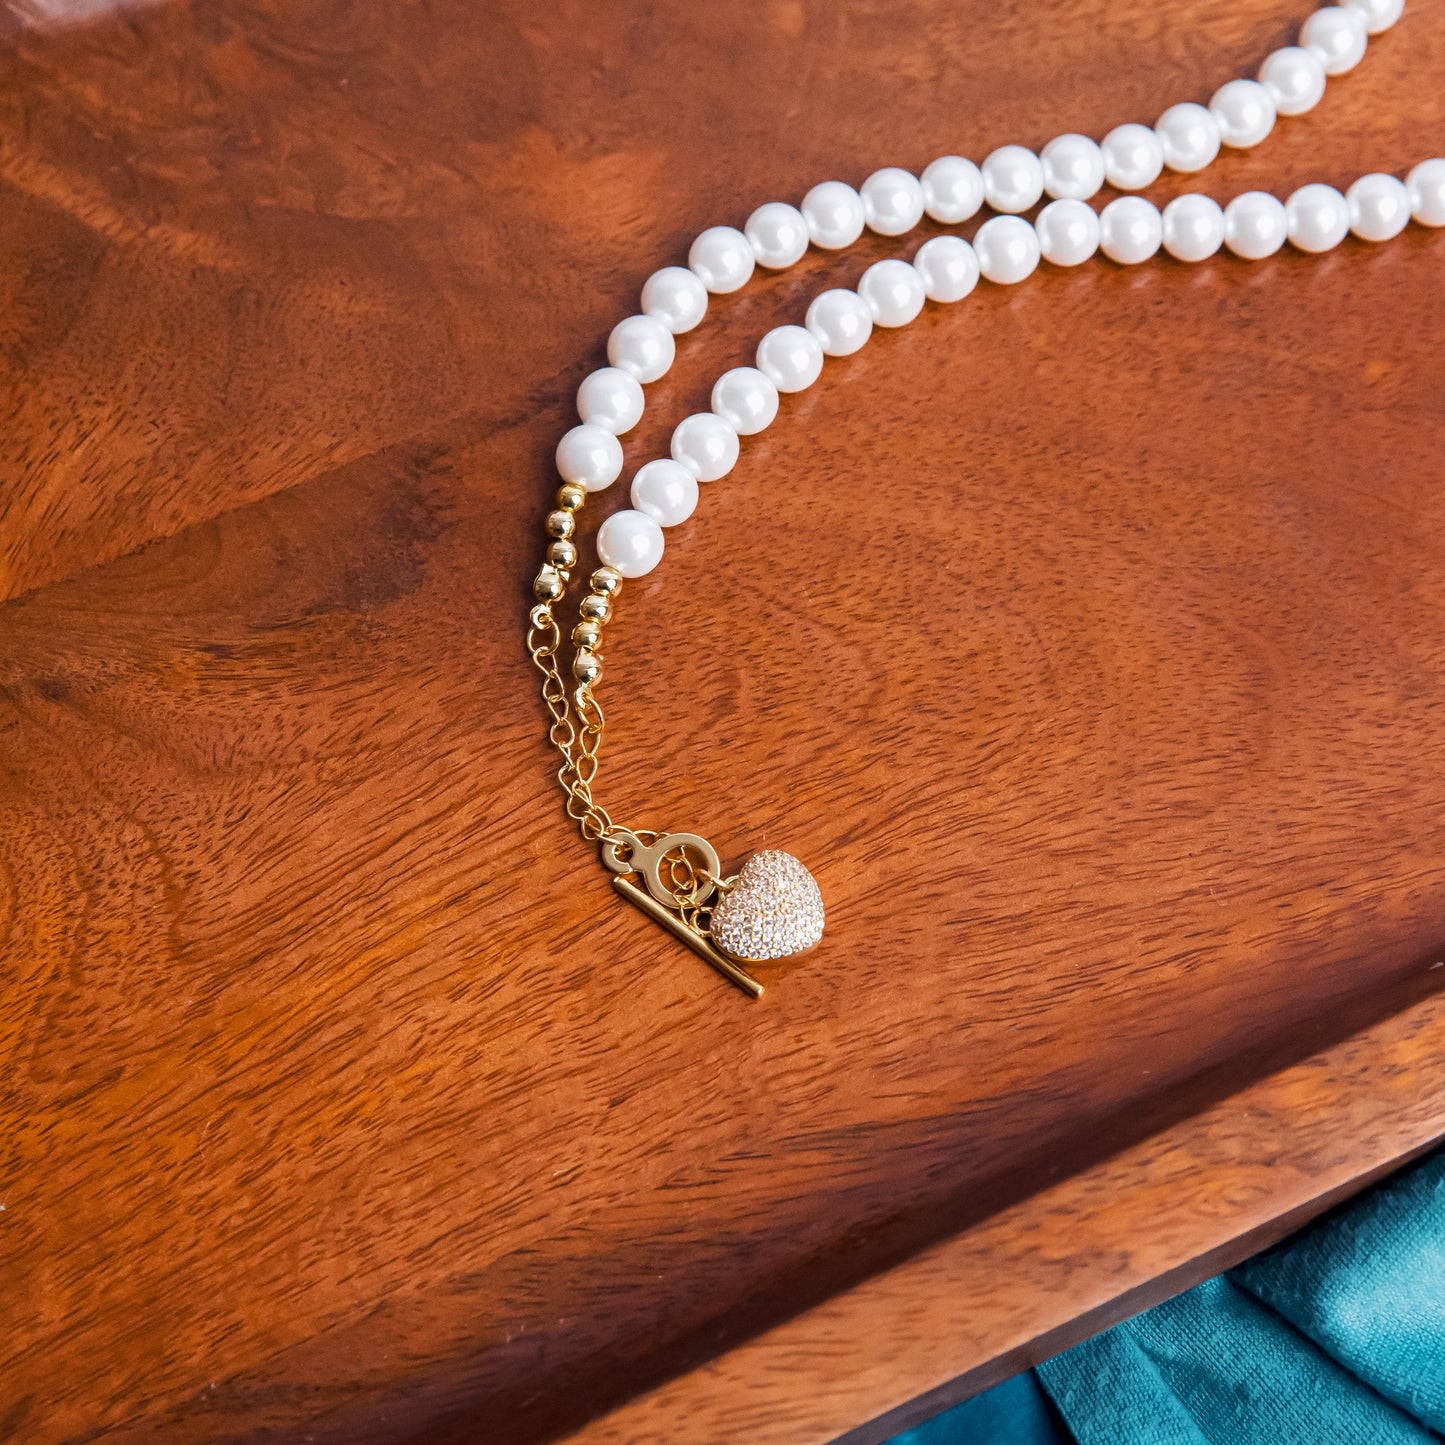 PEARLS AND HEART NECKLACE